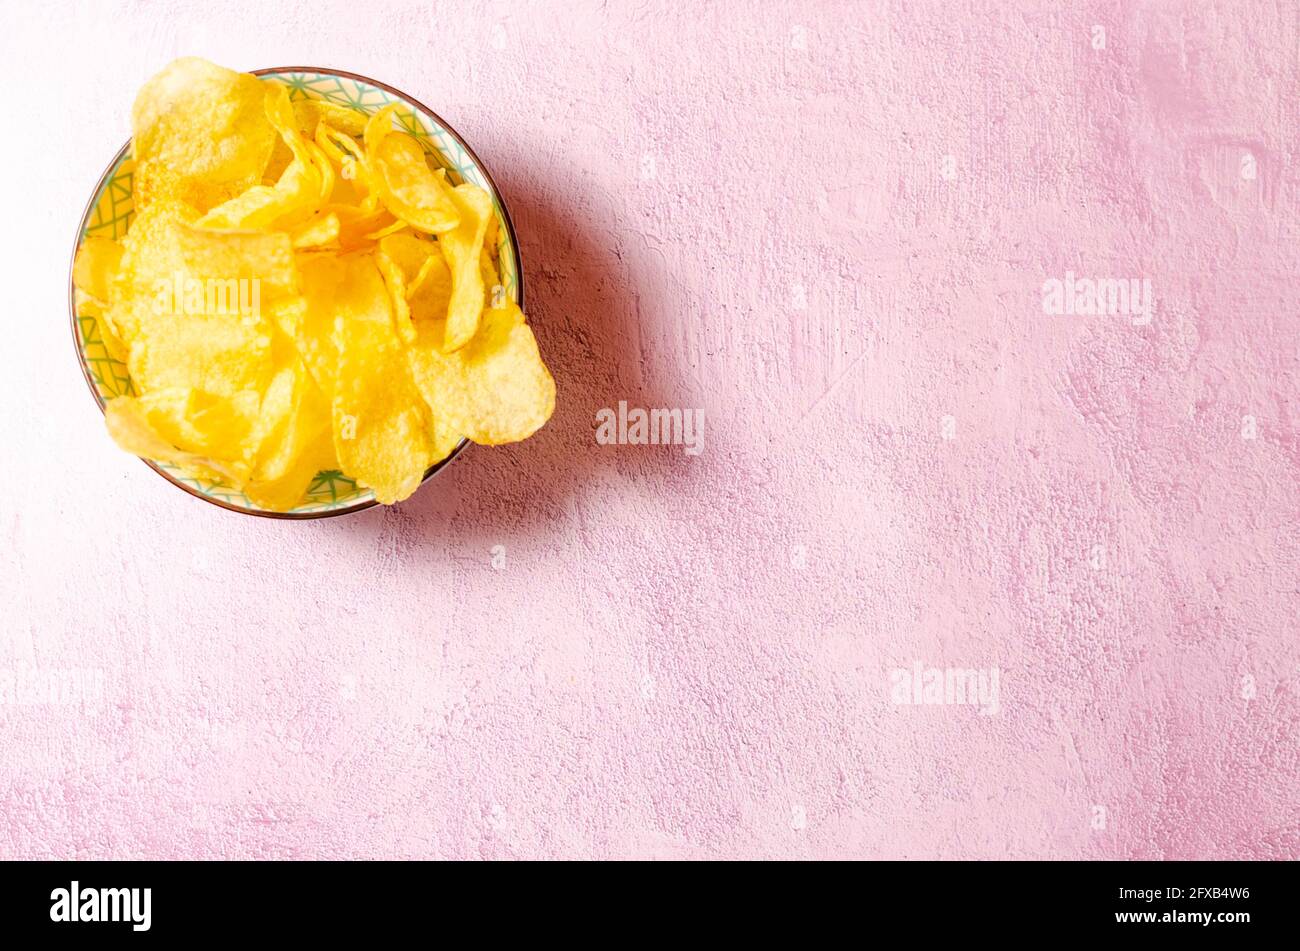 Bowl of potato chips on pink textured background. Image with copy space Stock Photo